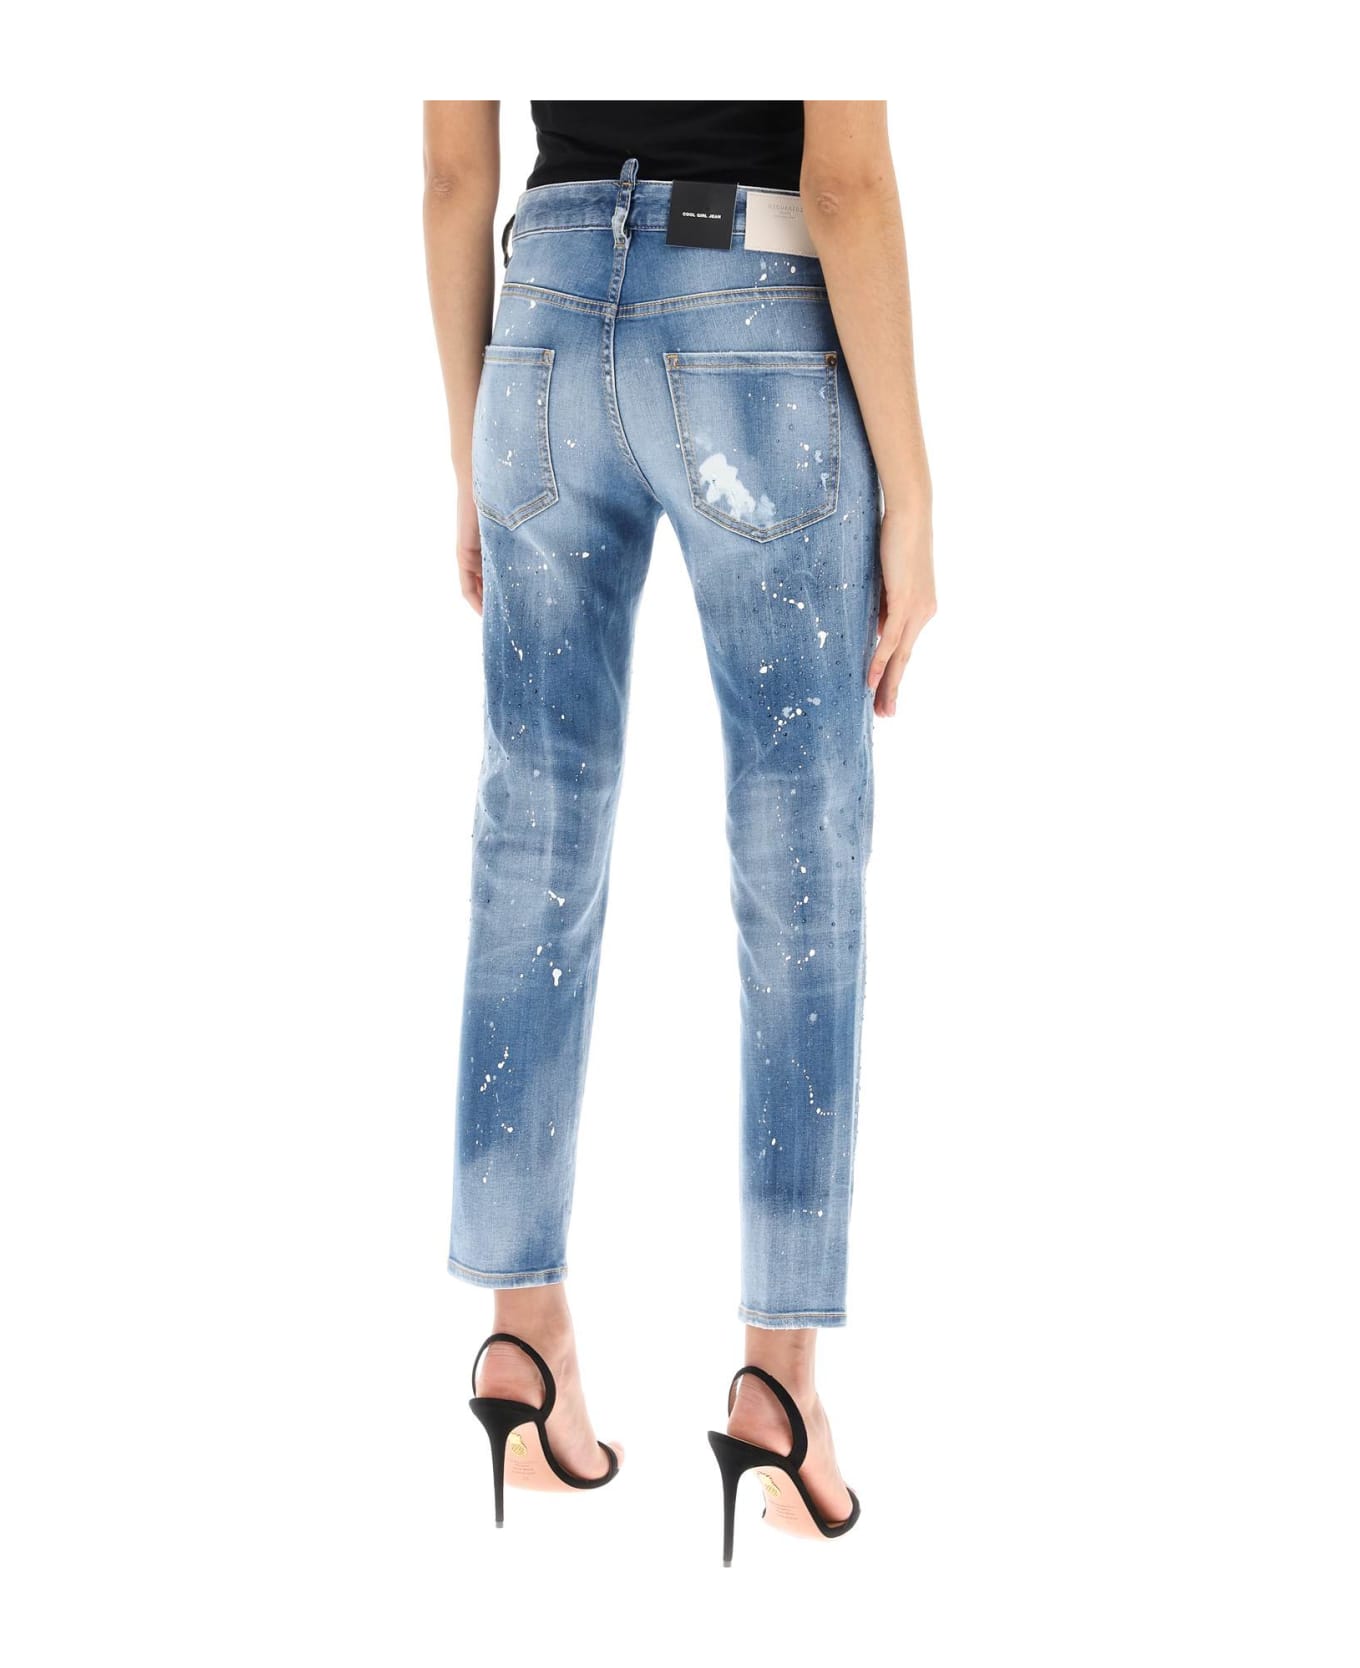 Dsquared2 Cool Girl Jeans In Medium Ice Spots Wash - NAVY BLUE (Light blue)